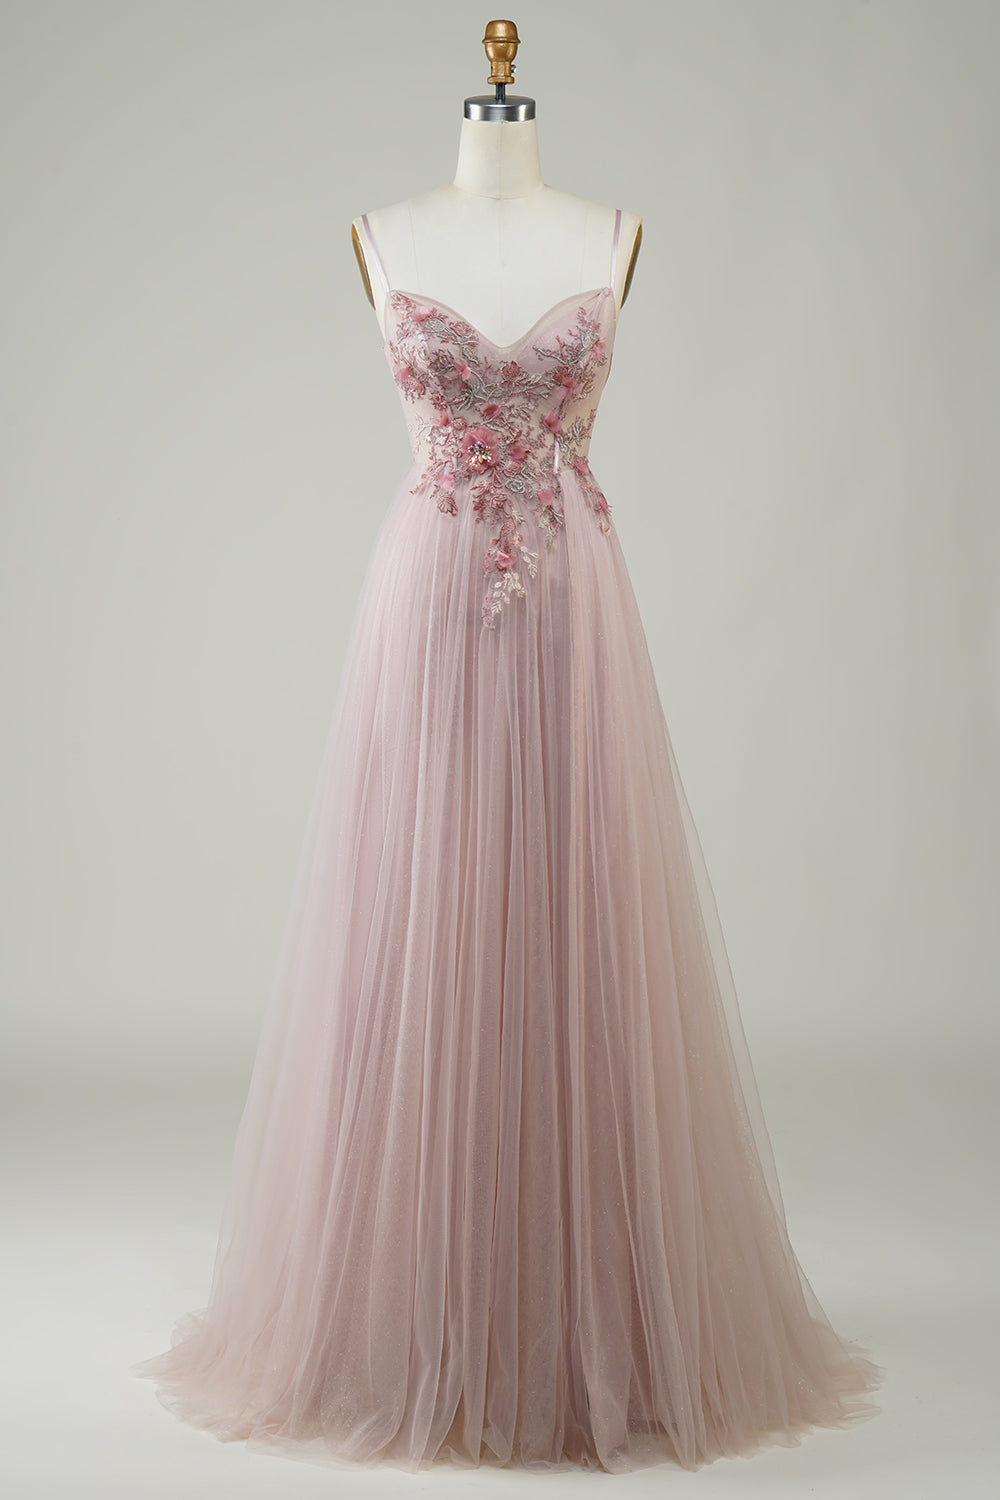 Blush Corset A-Line Long Prom Dress with Flowers